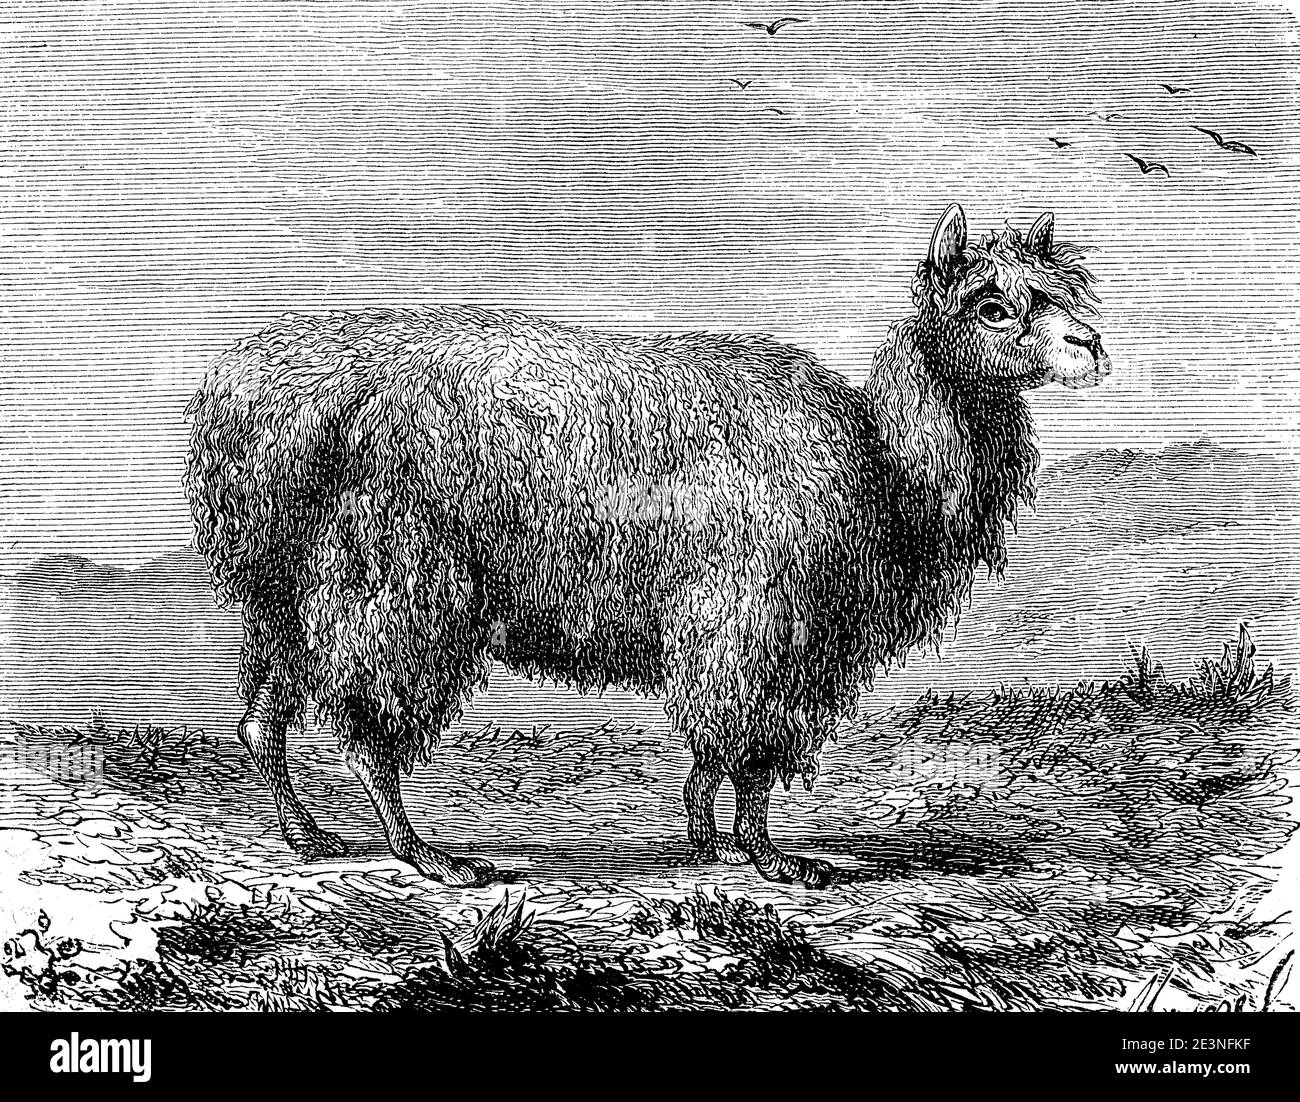 Alpaca, vicugna pacos, also pako, is a domesticated camel form originating from the South American Andes, illustration from 1870  /  Alpaka, Vicugna pacos, auch Pako, ist eine aus den südamerikanischen Anden stammende, domestizierte Kamelform, Illustration aus 1870, Historisch, historical, digital improved reproduction of an original from the 19th century / digitale Reproduktion einer Originalvorlage aus dem 19. Jahrhundert, Stock Photo